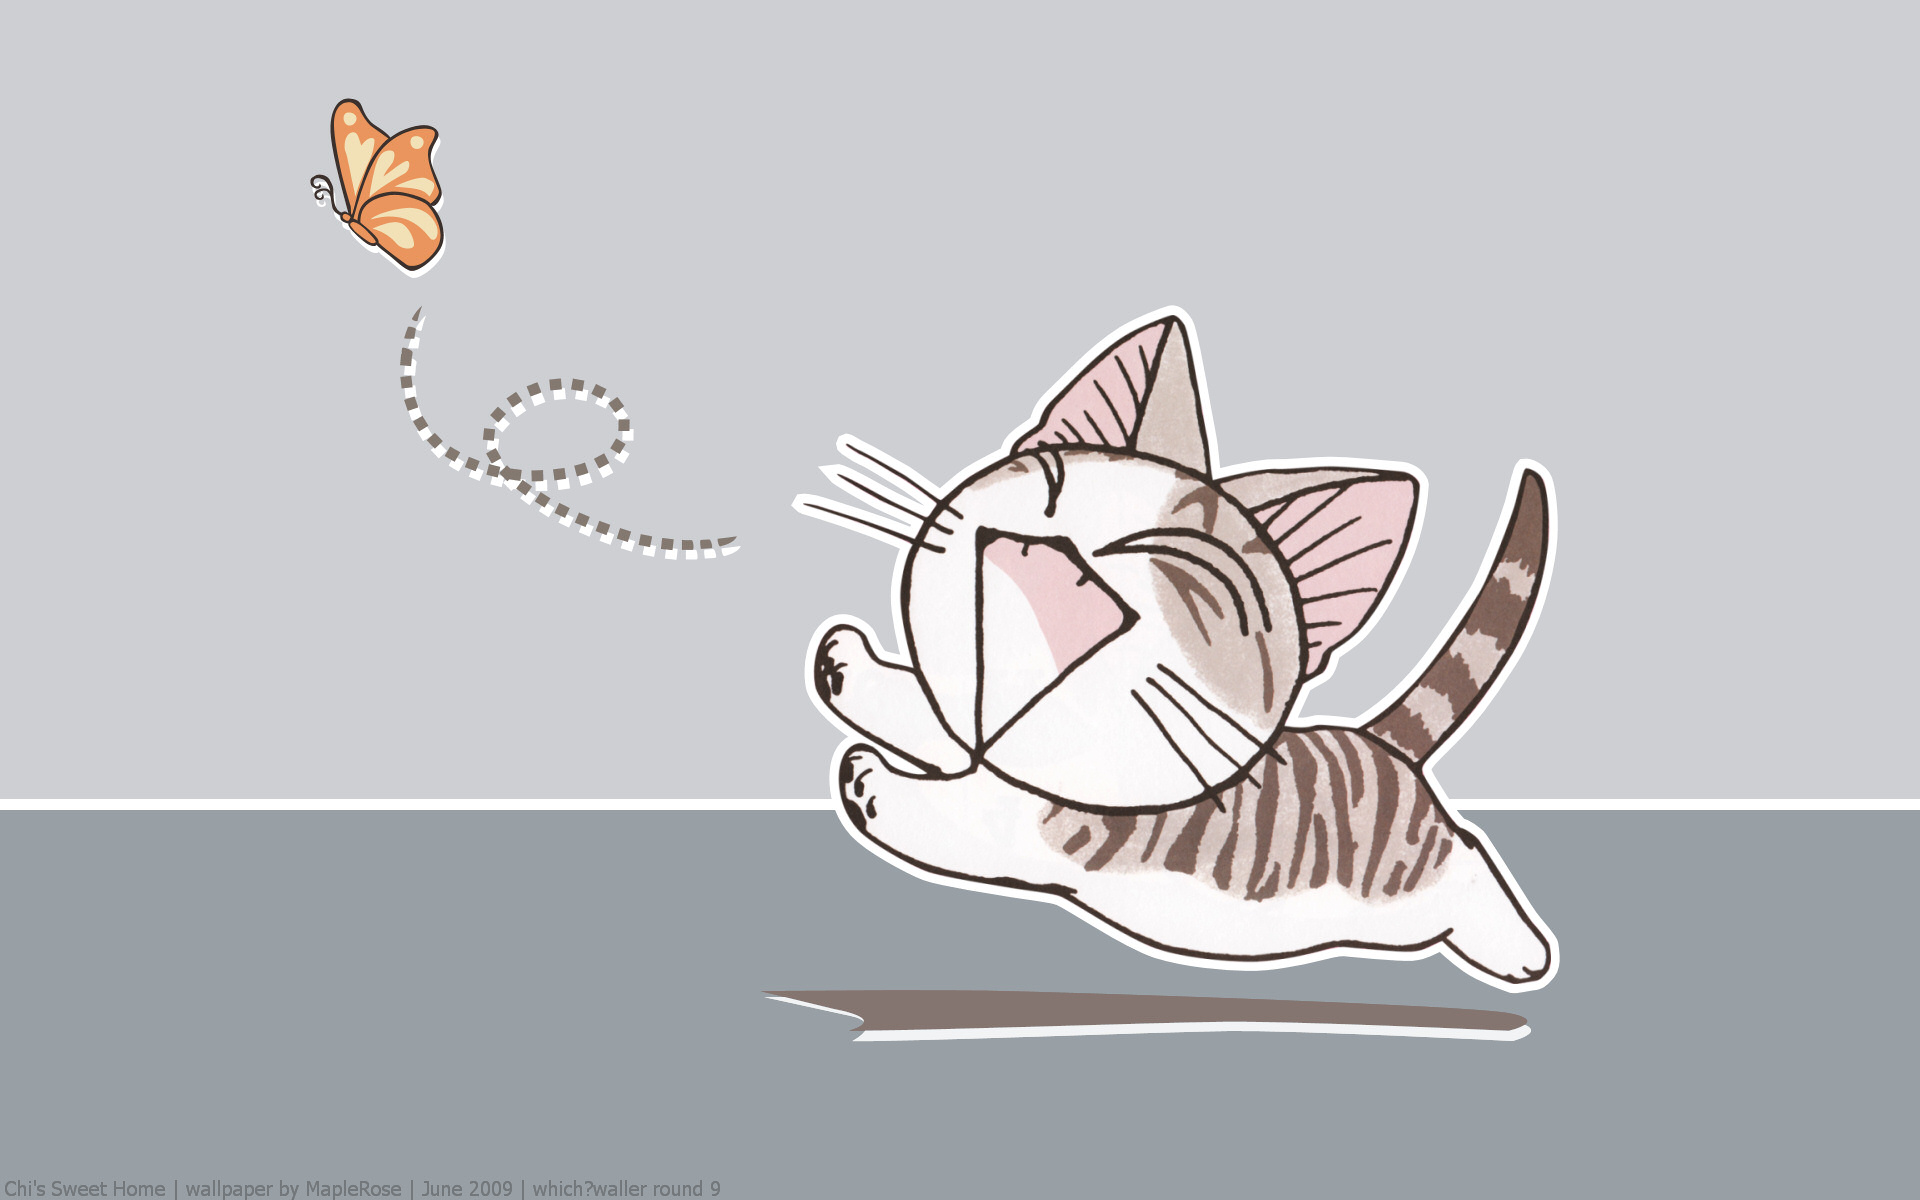 chi, Chiand039s, Sweet, Home, Cats,  drawn Wallpaper